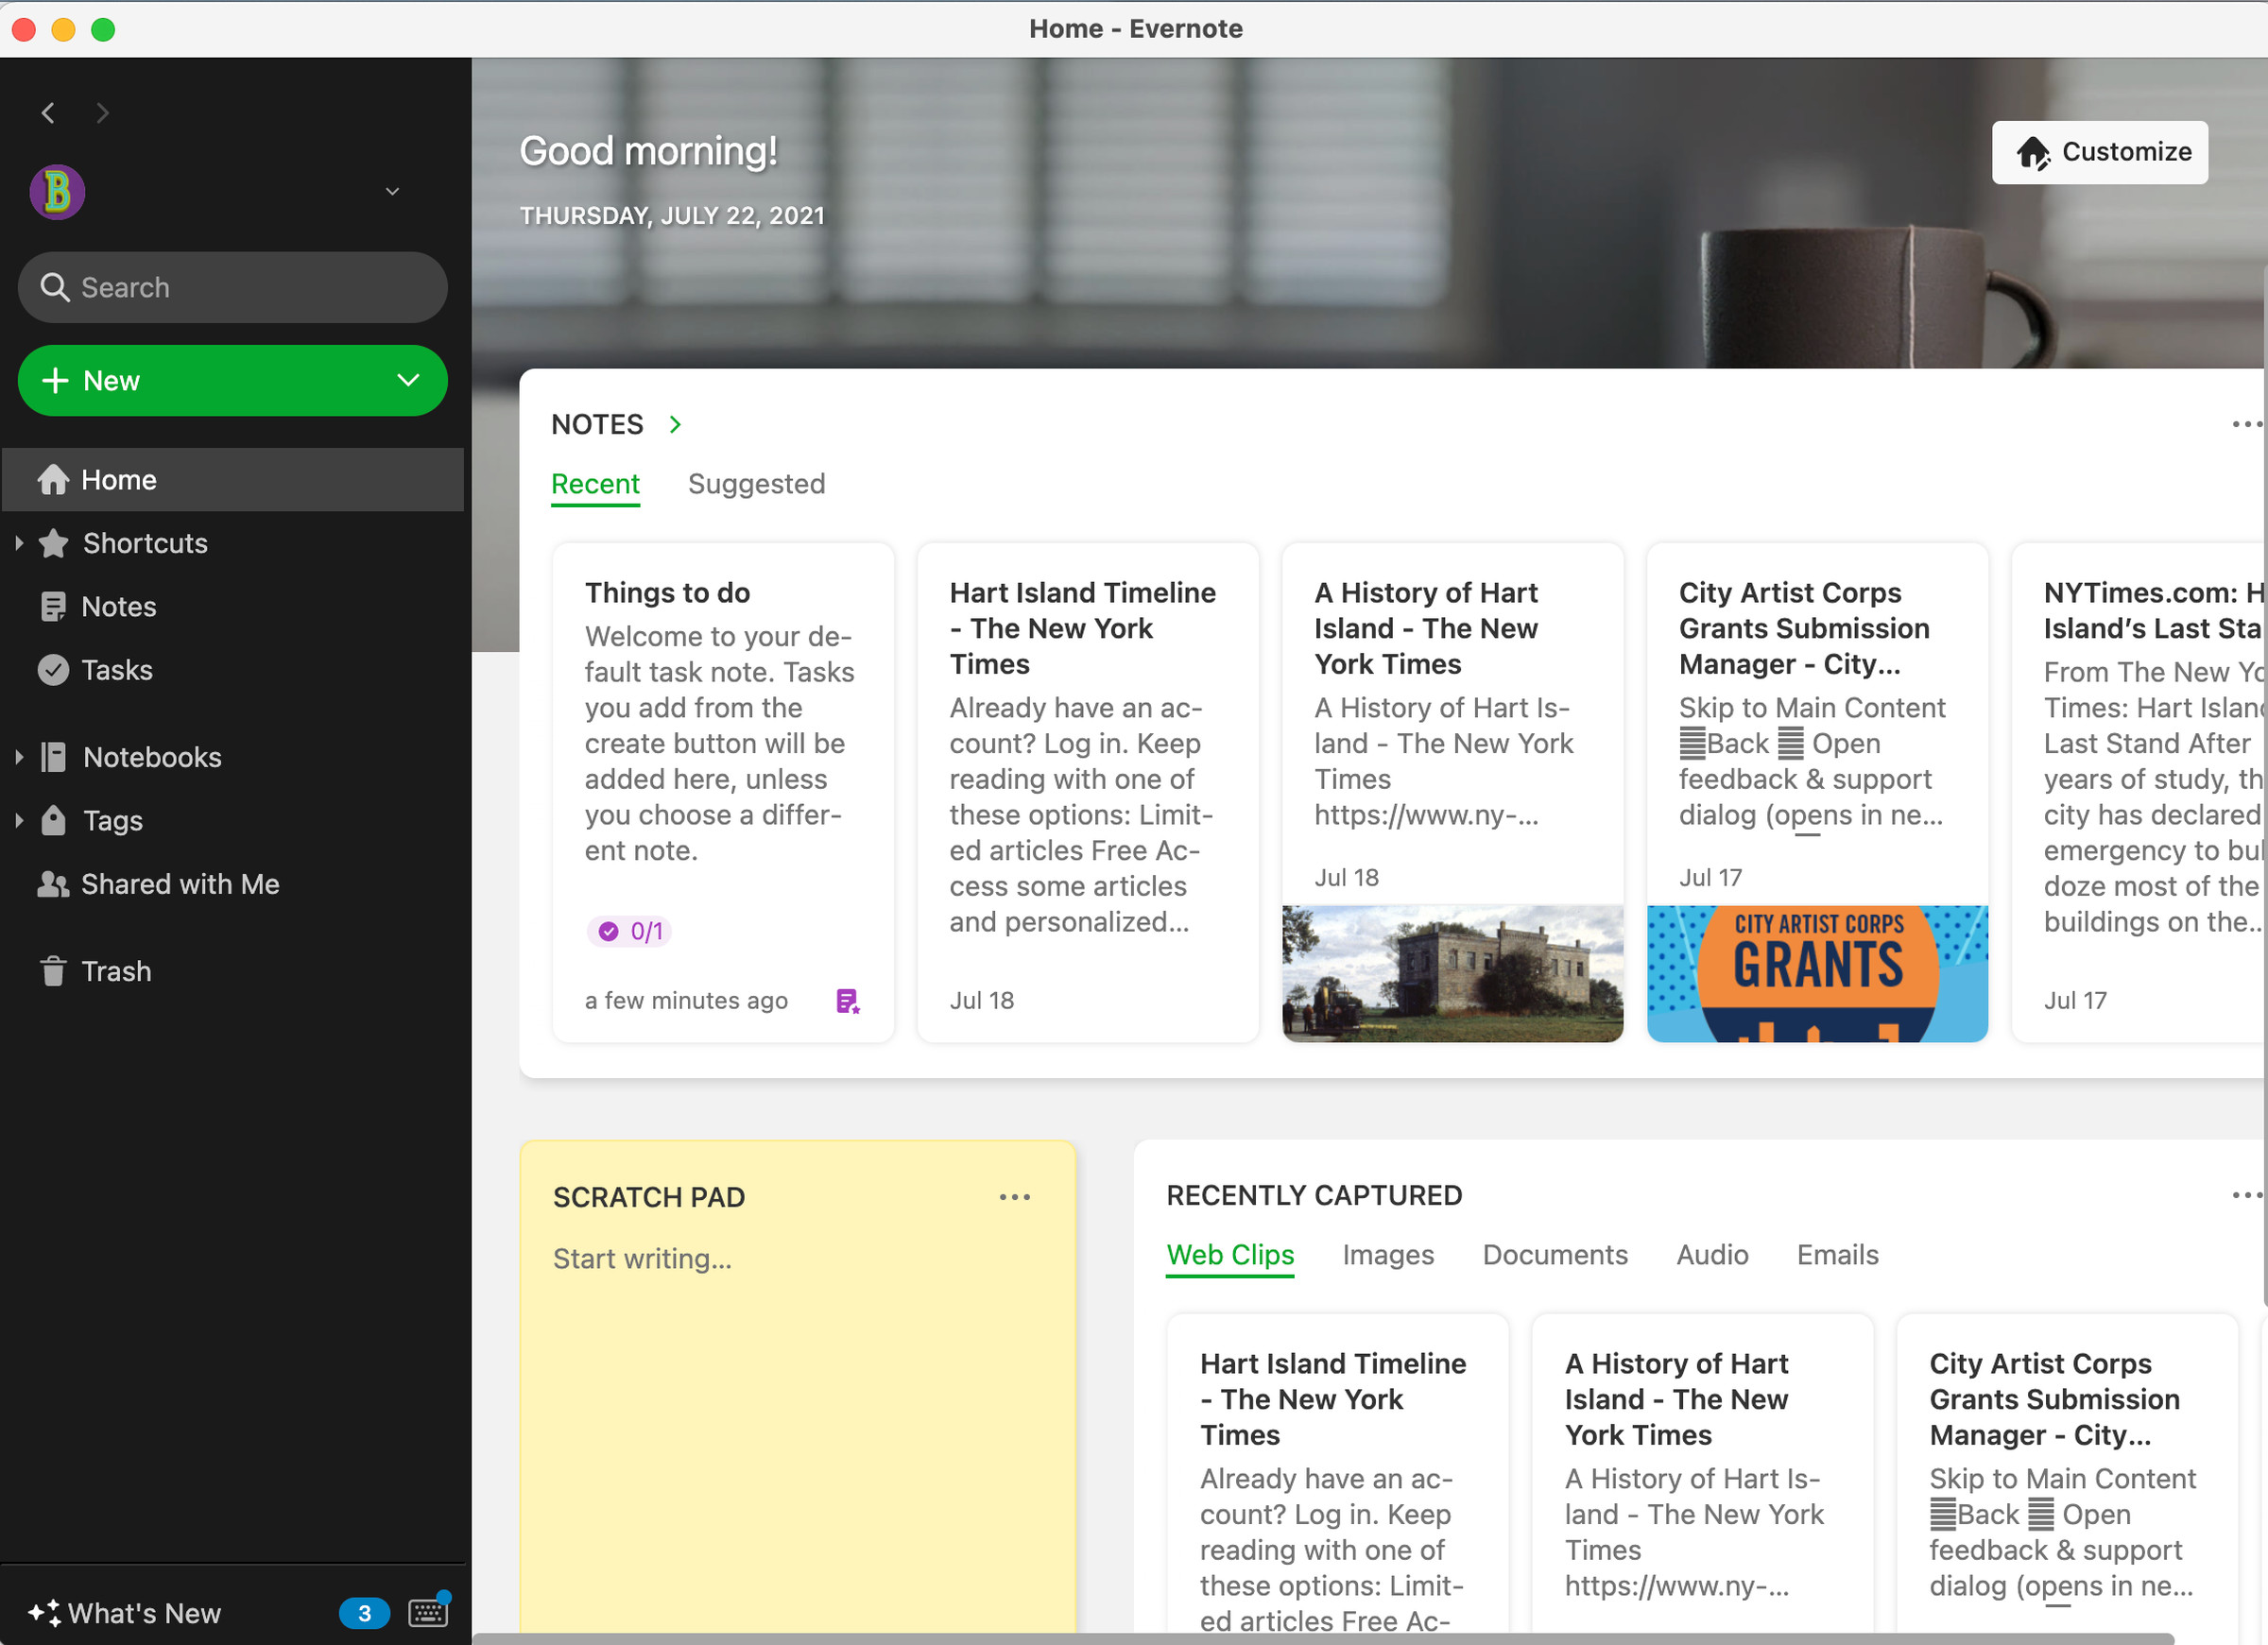 Evernote’s new homepage is well-designed and useful.